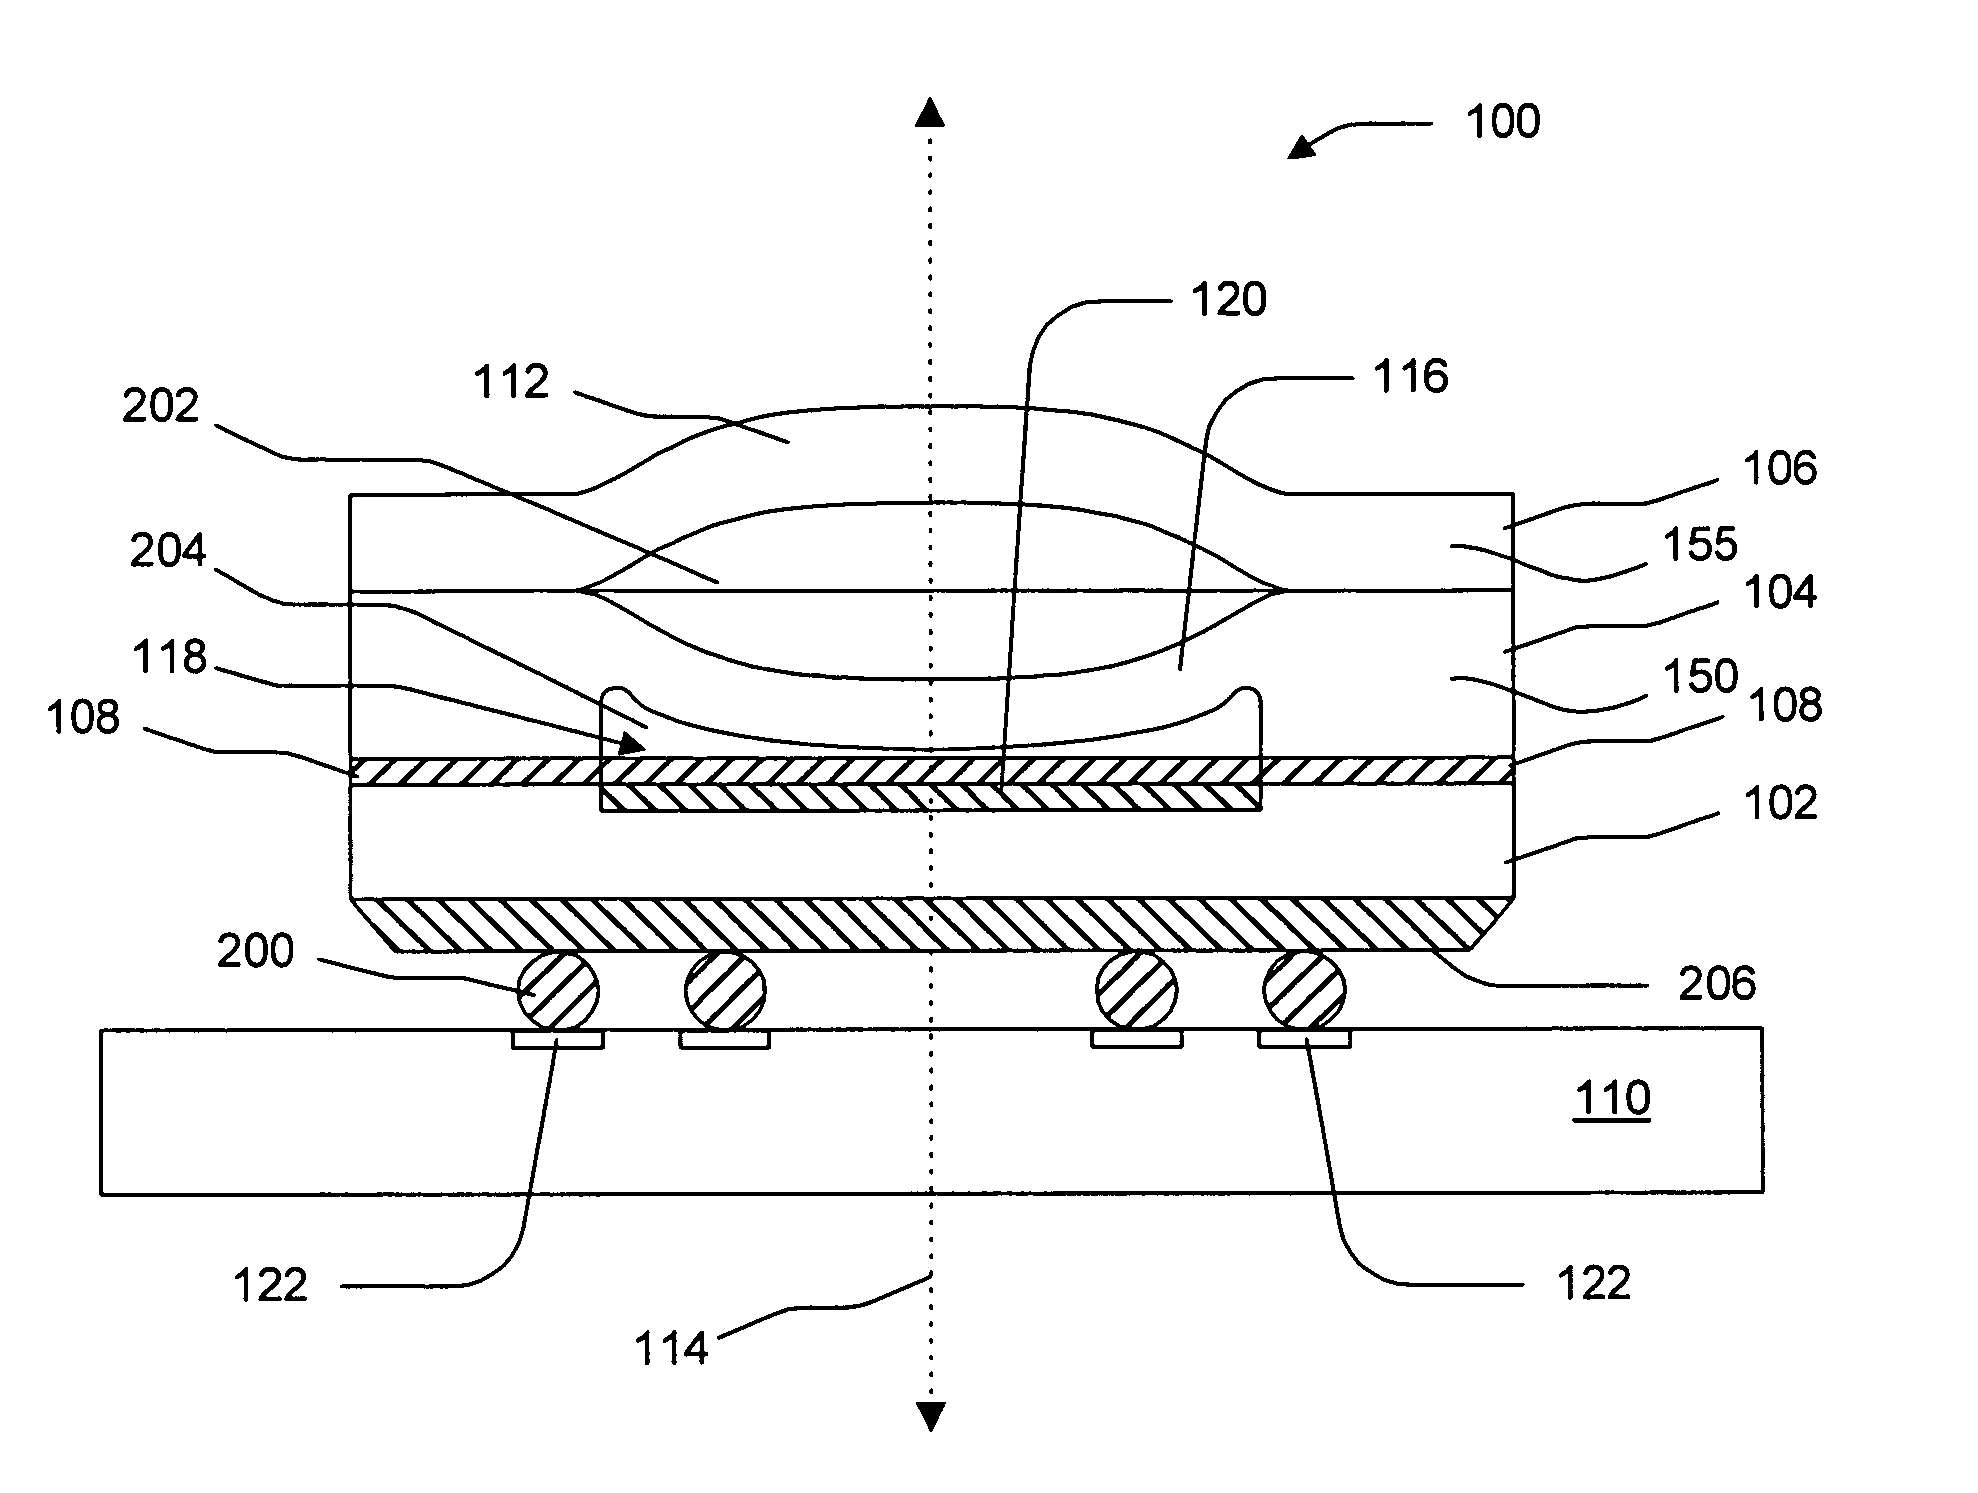 Wafer level camera module and method of manufacture